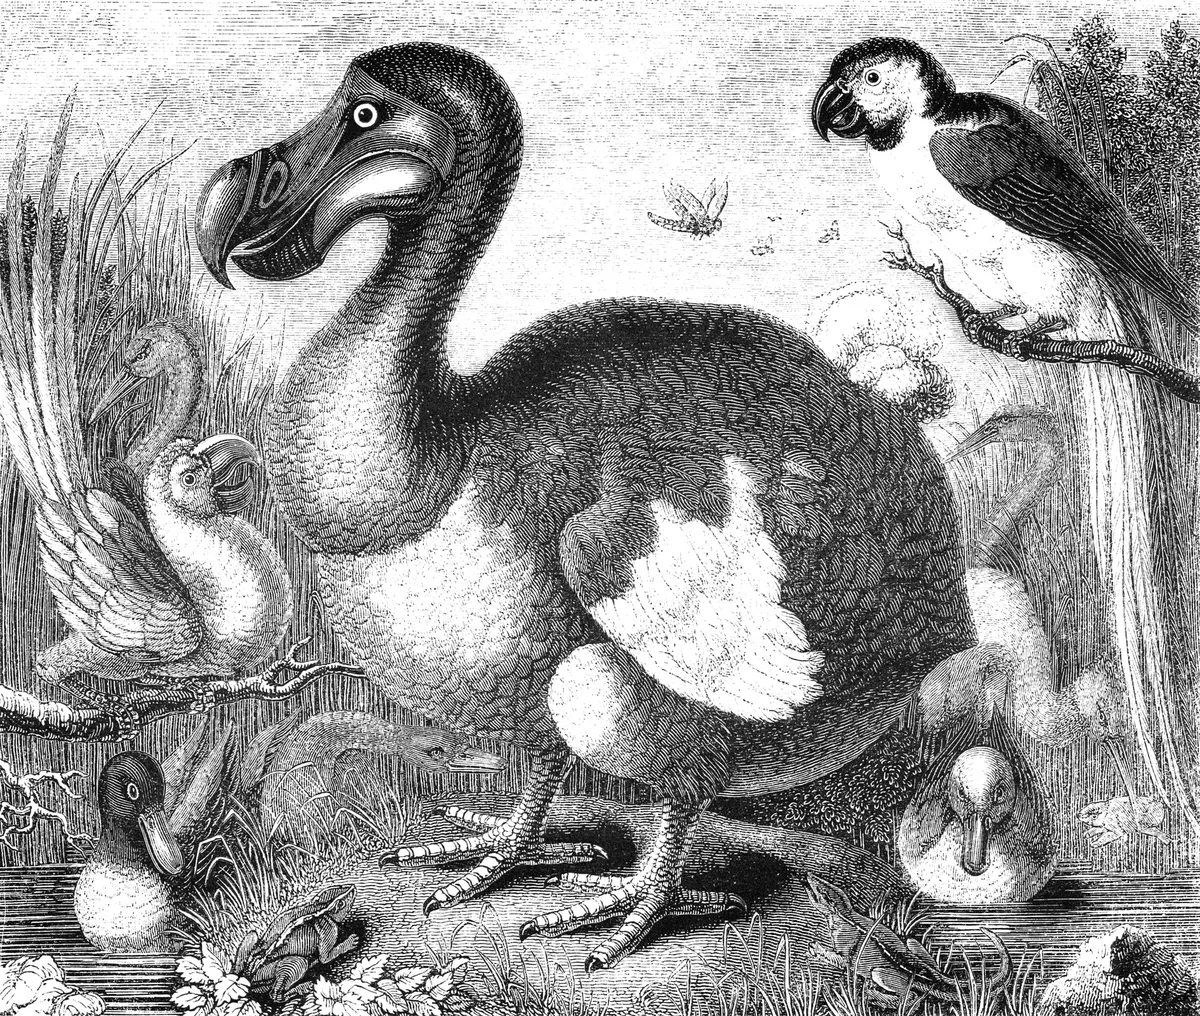 An illustration of a dodo bird in black and white